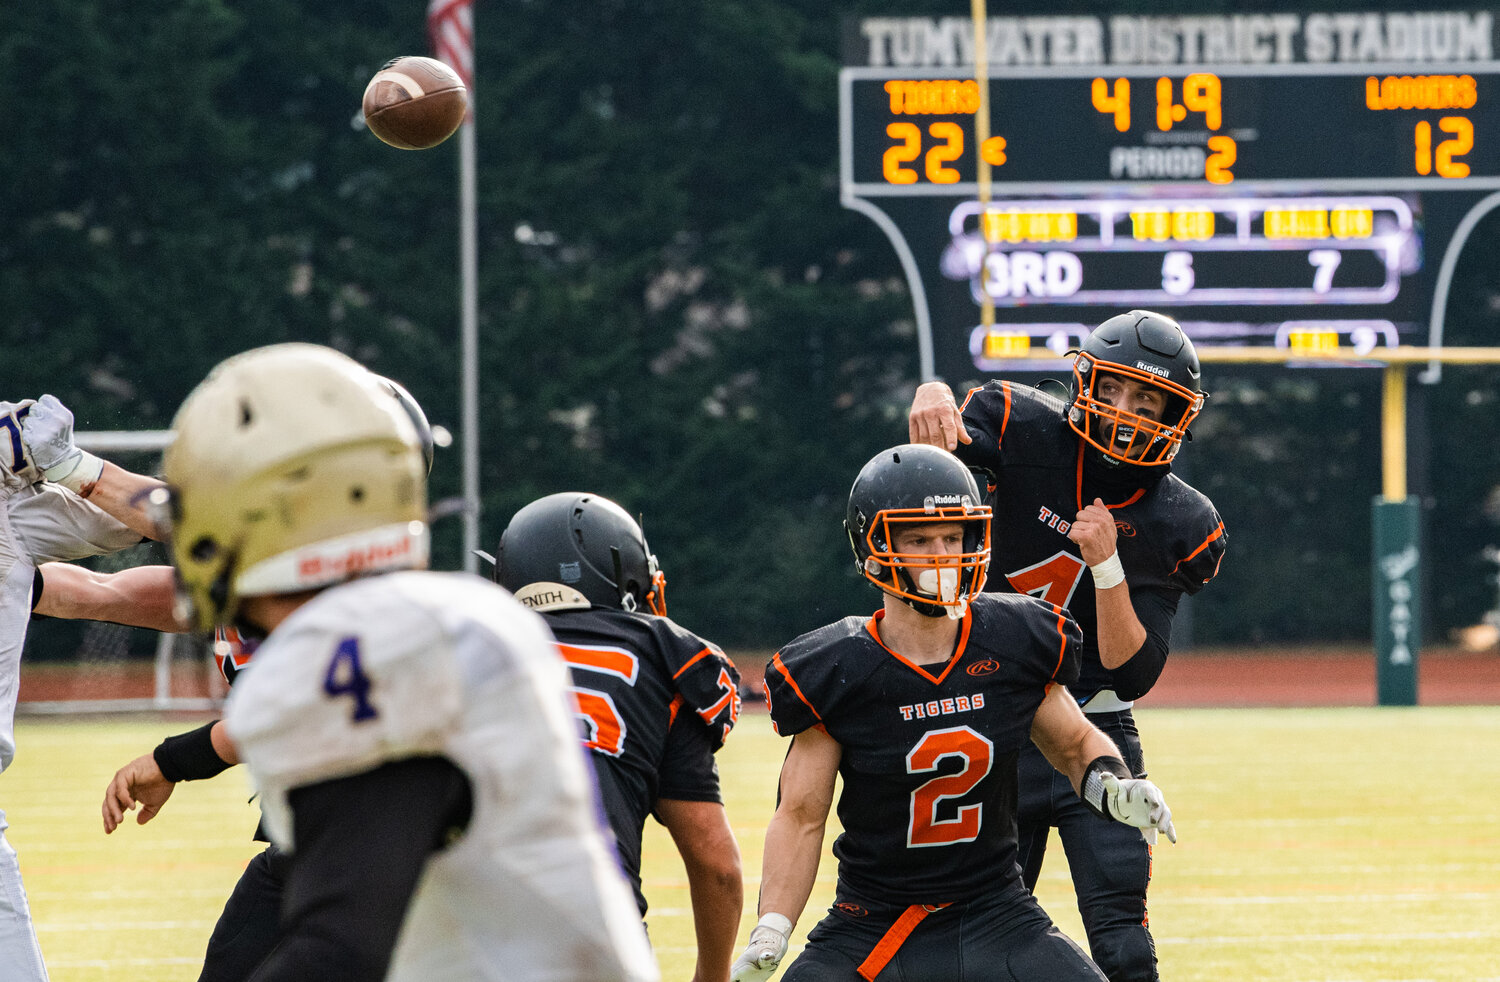 Napavine quarterback Ashton Demarest makes a throw toward the end zone during the 2B state semifinals against Onalaska in Tumwater on Saturday.